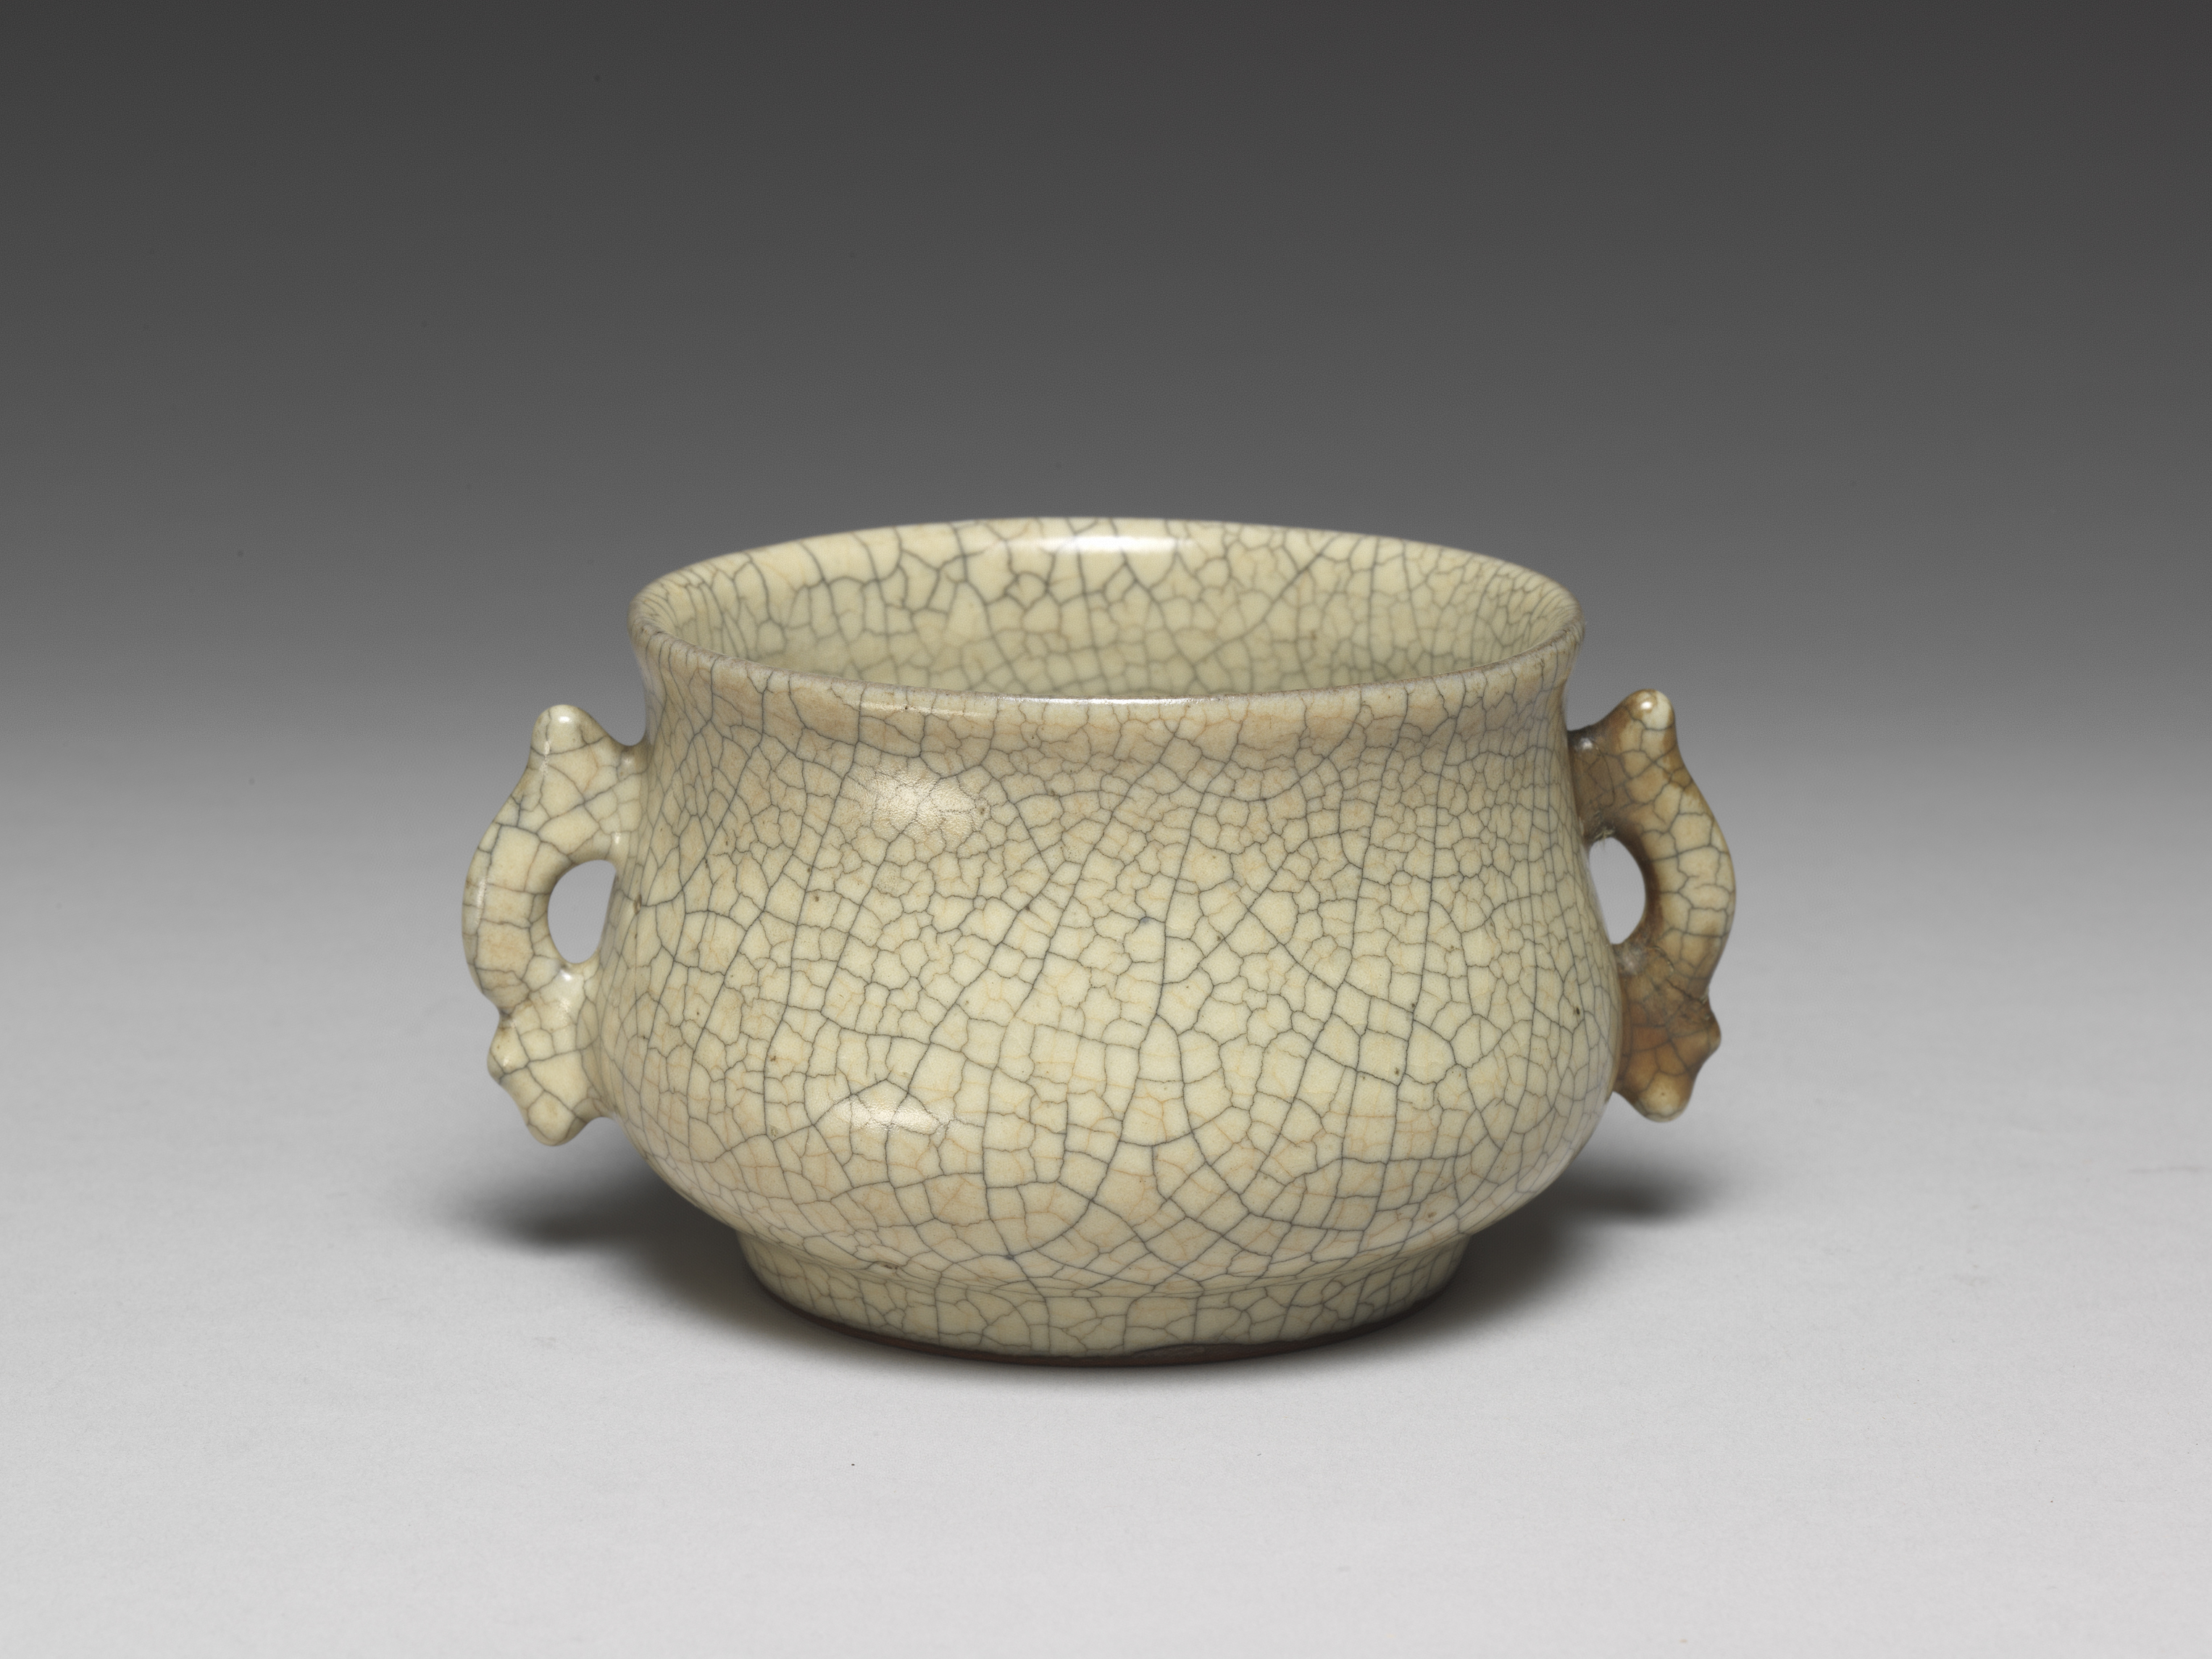 Censer with fish-shaped handles in cream-colored celadon glaze
Yuan dynasty, 14th century
